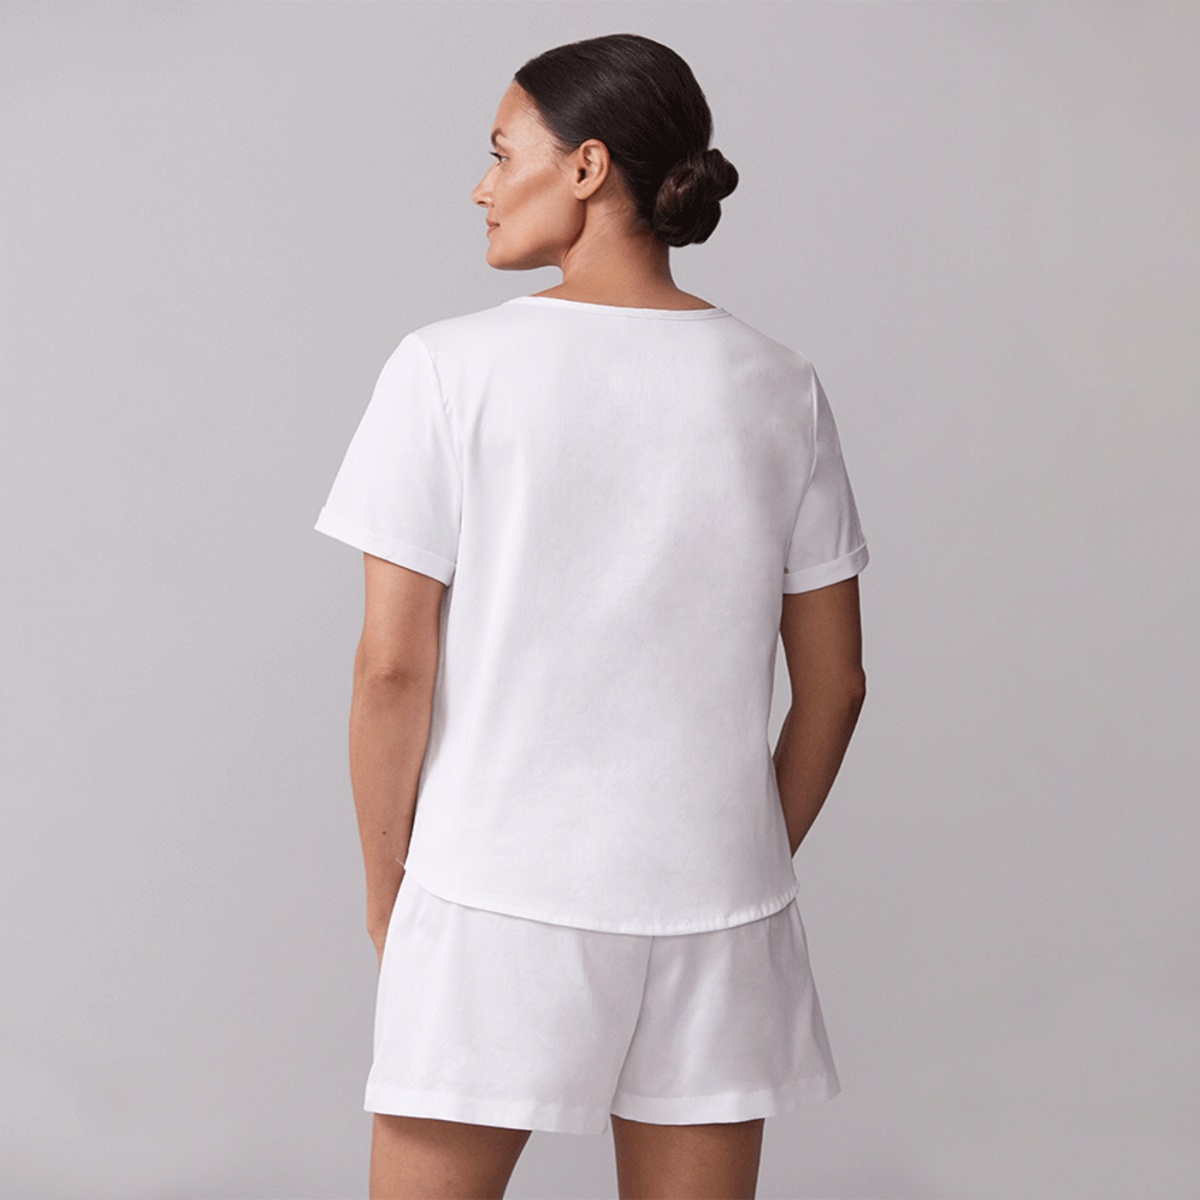 Back View of Model Wearing a White Sferra Caricia Short Sleeve Top